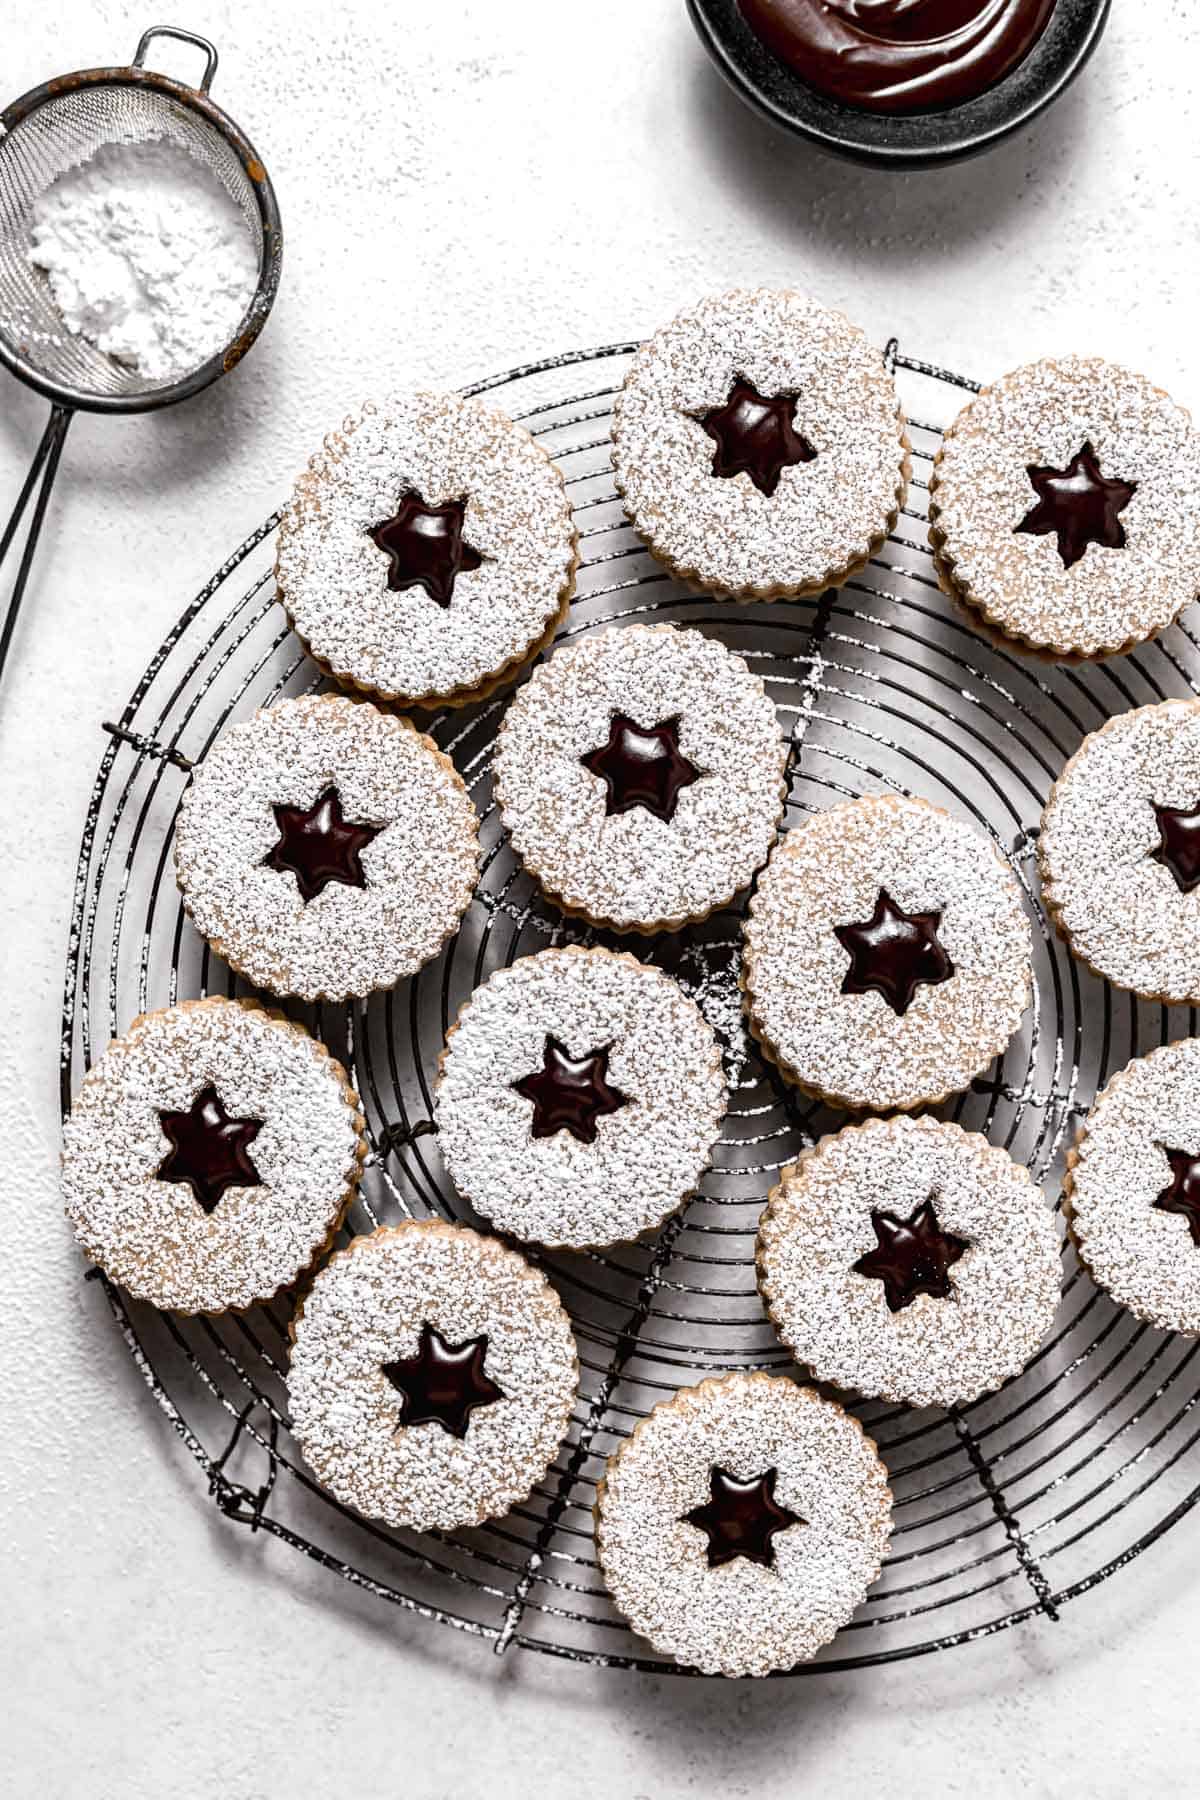 assembled linzer cookies on wire rack